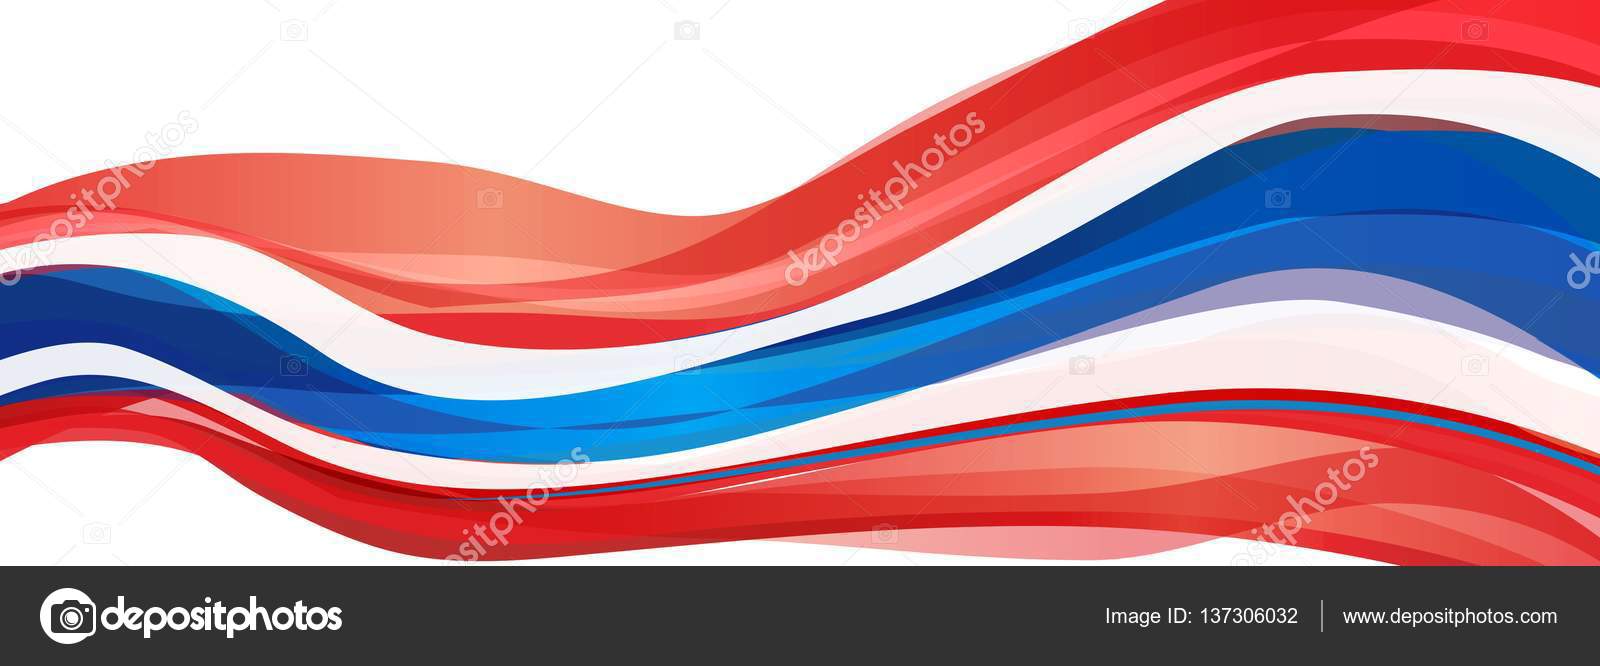 Red White Blue Striped Flag Of The Kingdom Of Thailand Stock